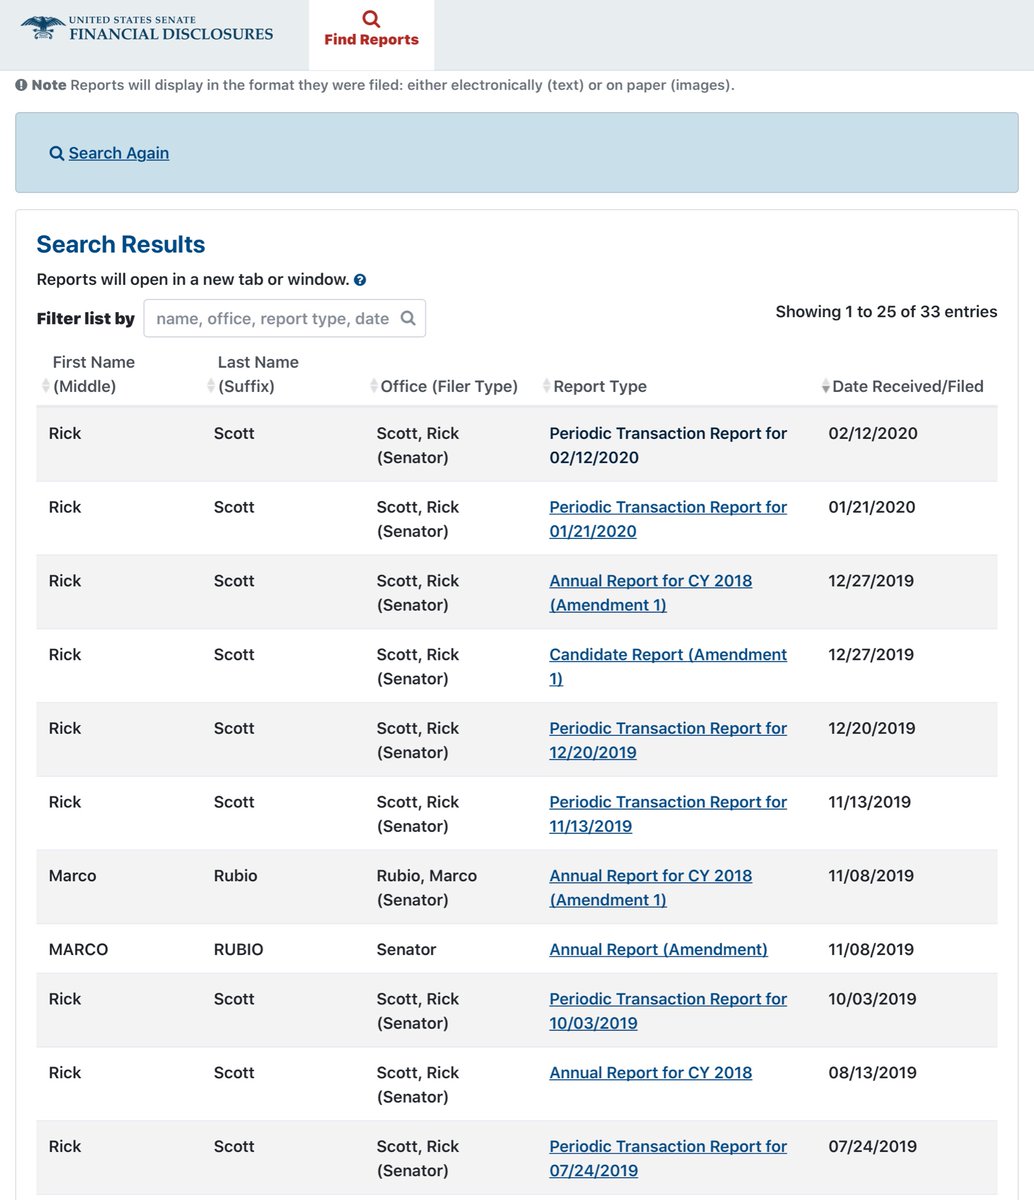 Not going to lie, I started to get a wwweeeee bit excited when I got to Florida but to be fair  @SenRickScott purchases weeks before the Jan briefing & nothing for RubioScott’s transaction report  https://efdsearch.senate.gov/search/view/ptr/3cfdaebe-eba9-4b90-9f87-c3b18d213656/